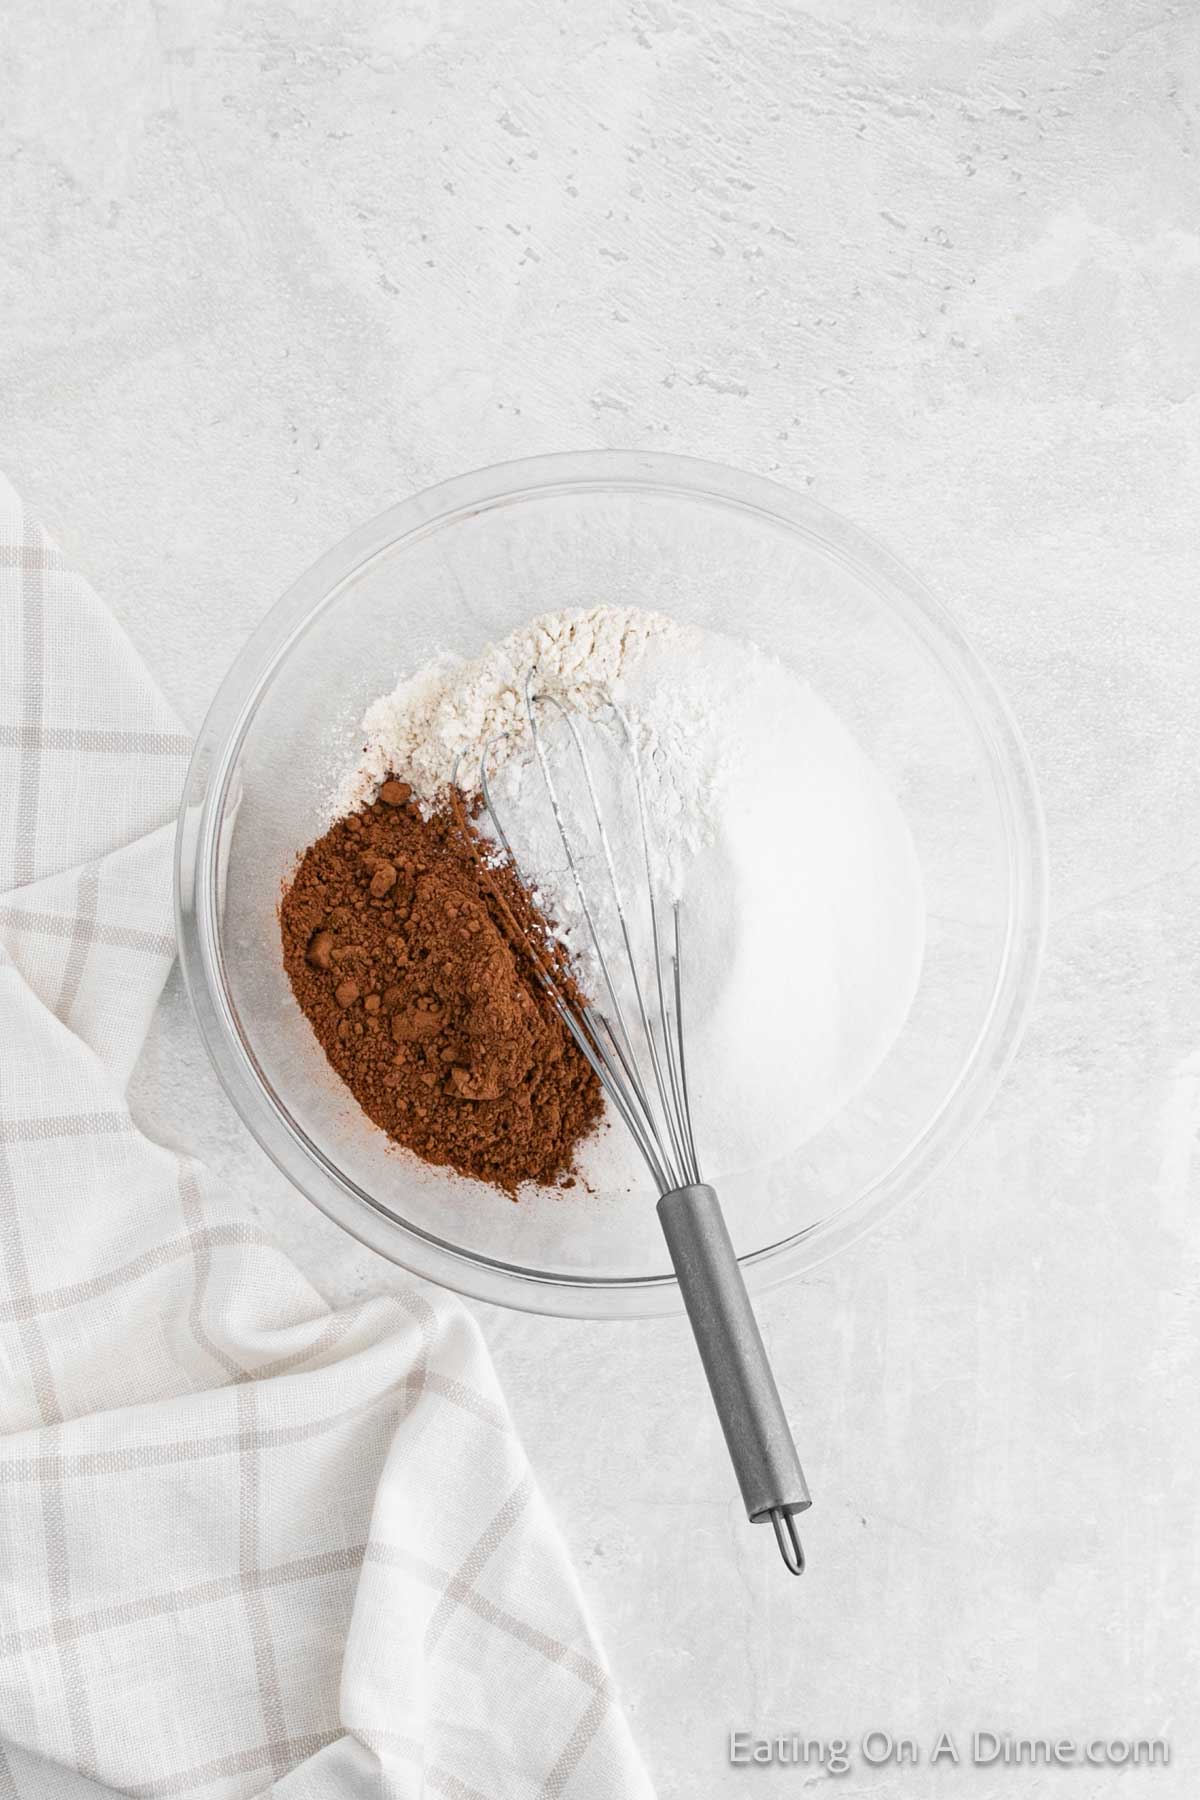 Whisking together flour, sugar, and cocoa powder in a bowl